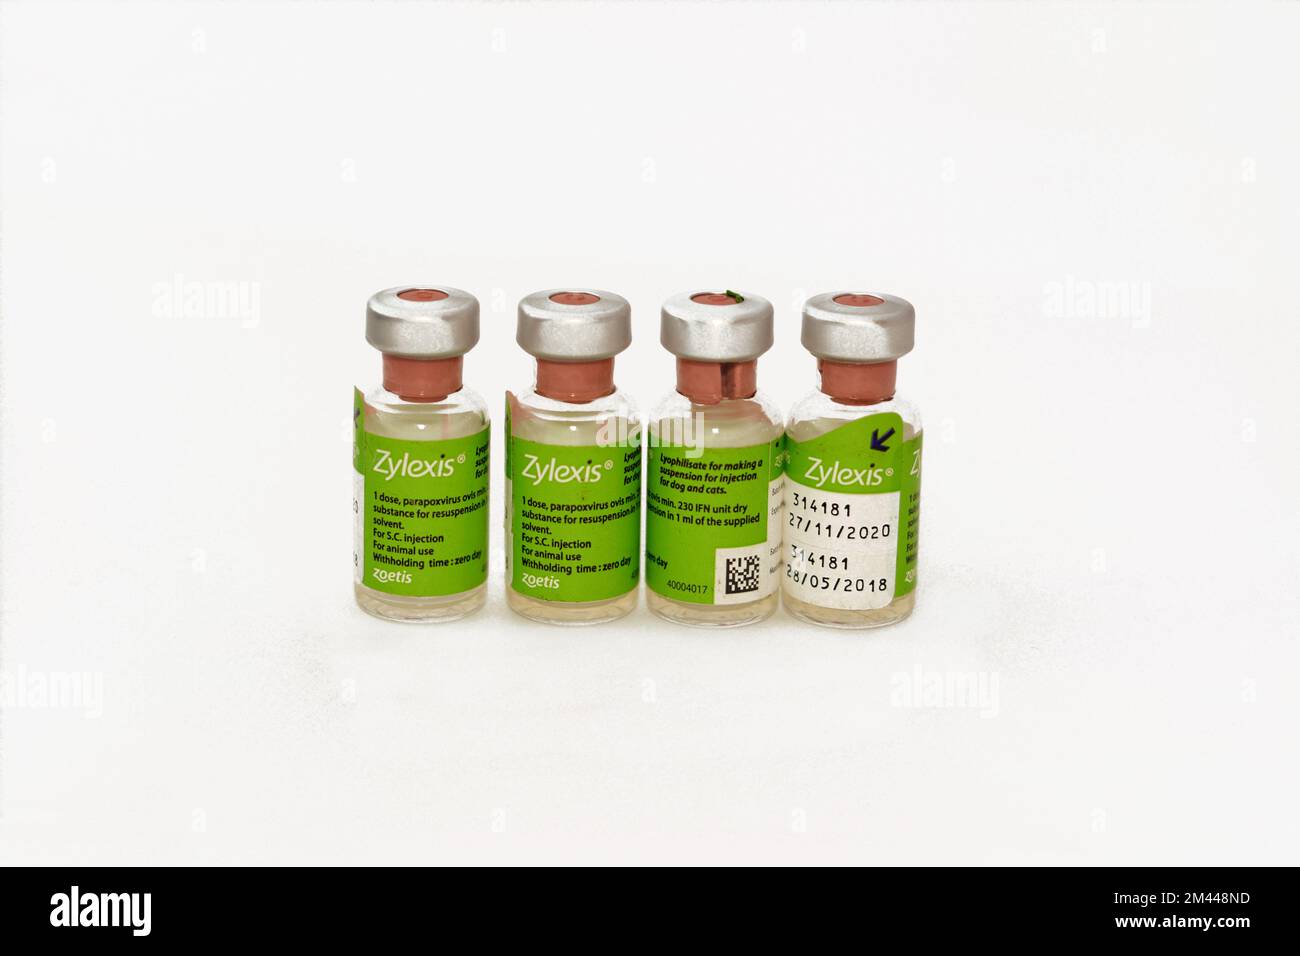 Cairo, Egypt, December 17 2022: Zylexis vaccine for prevention and treatment of multiple diseases for cats and dogs, Parapox ovis Virus Immunomodulato Stock Photo